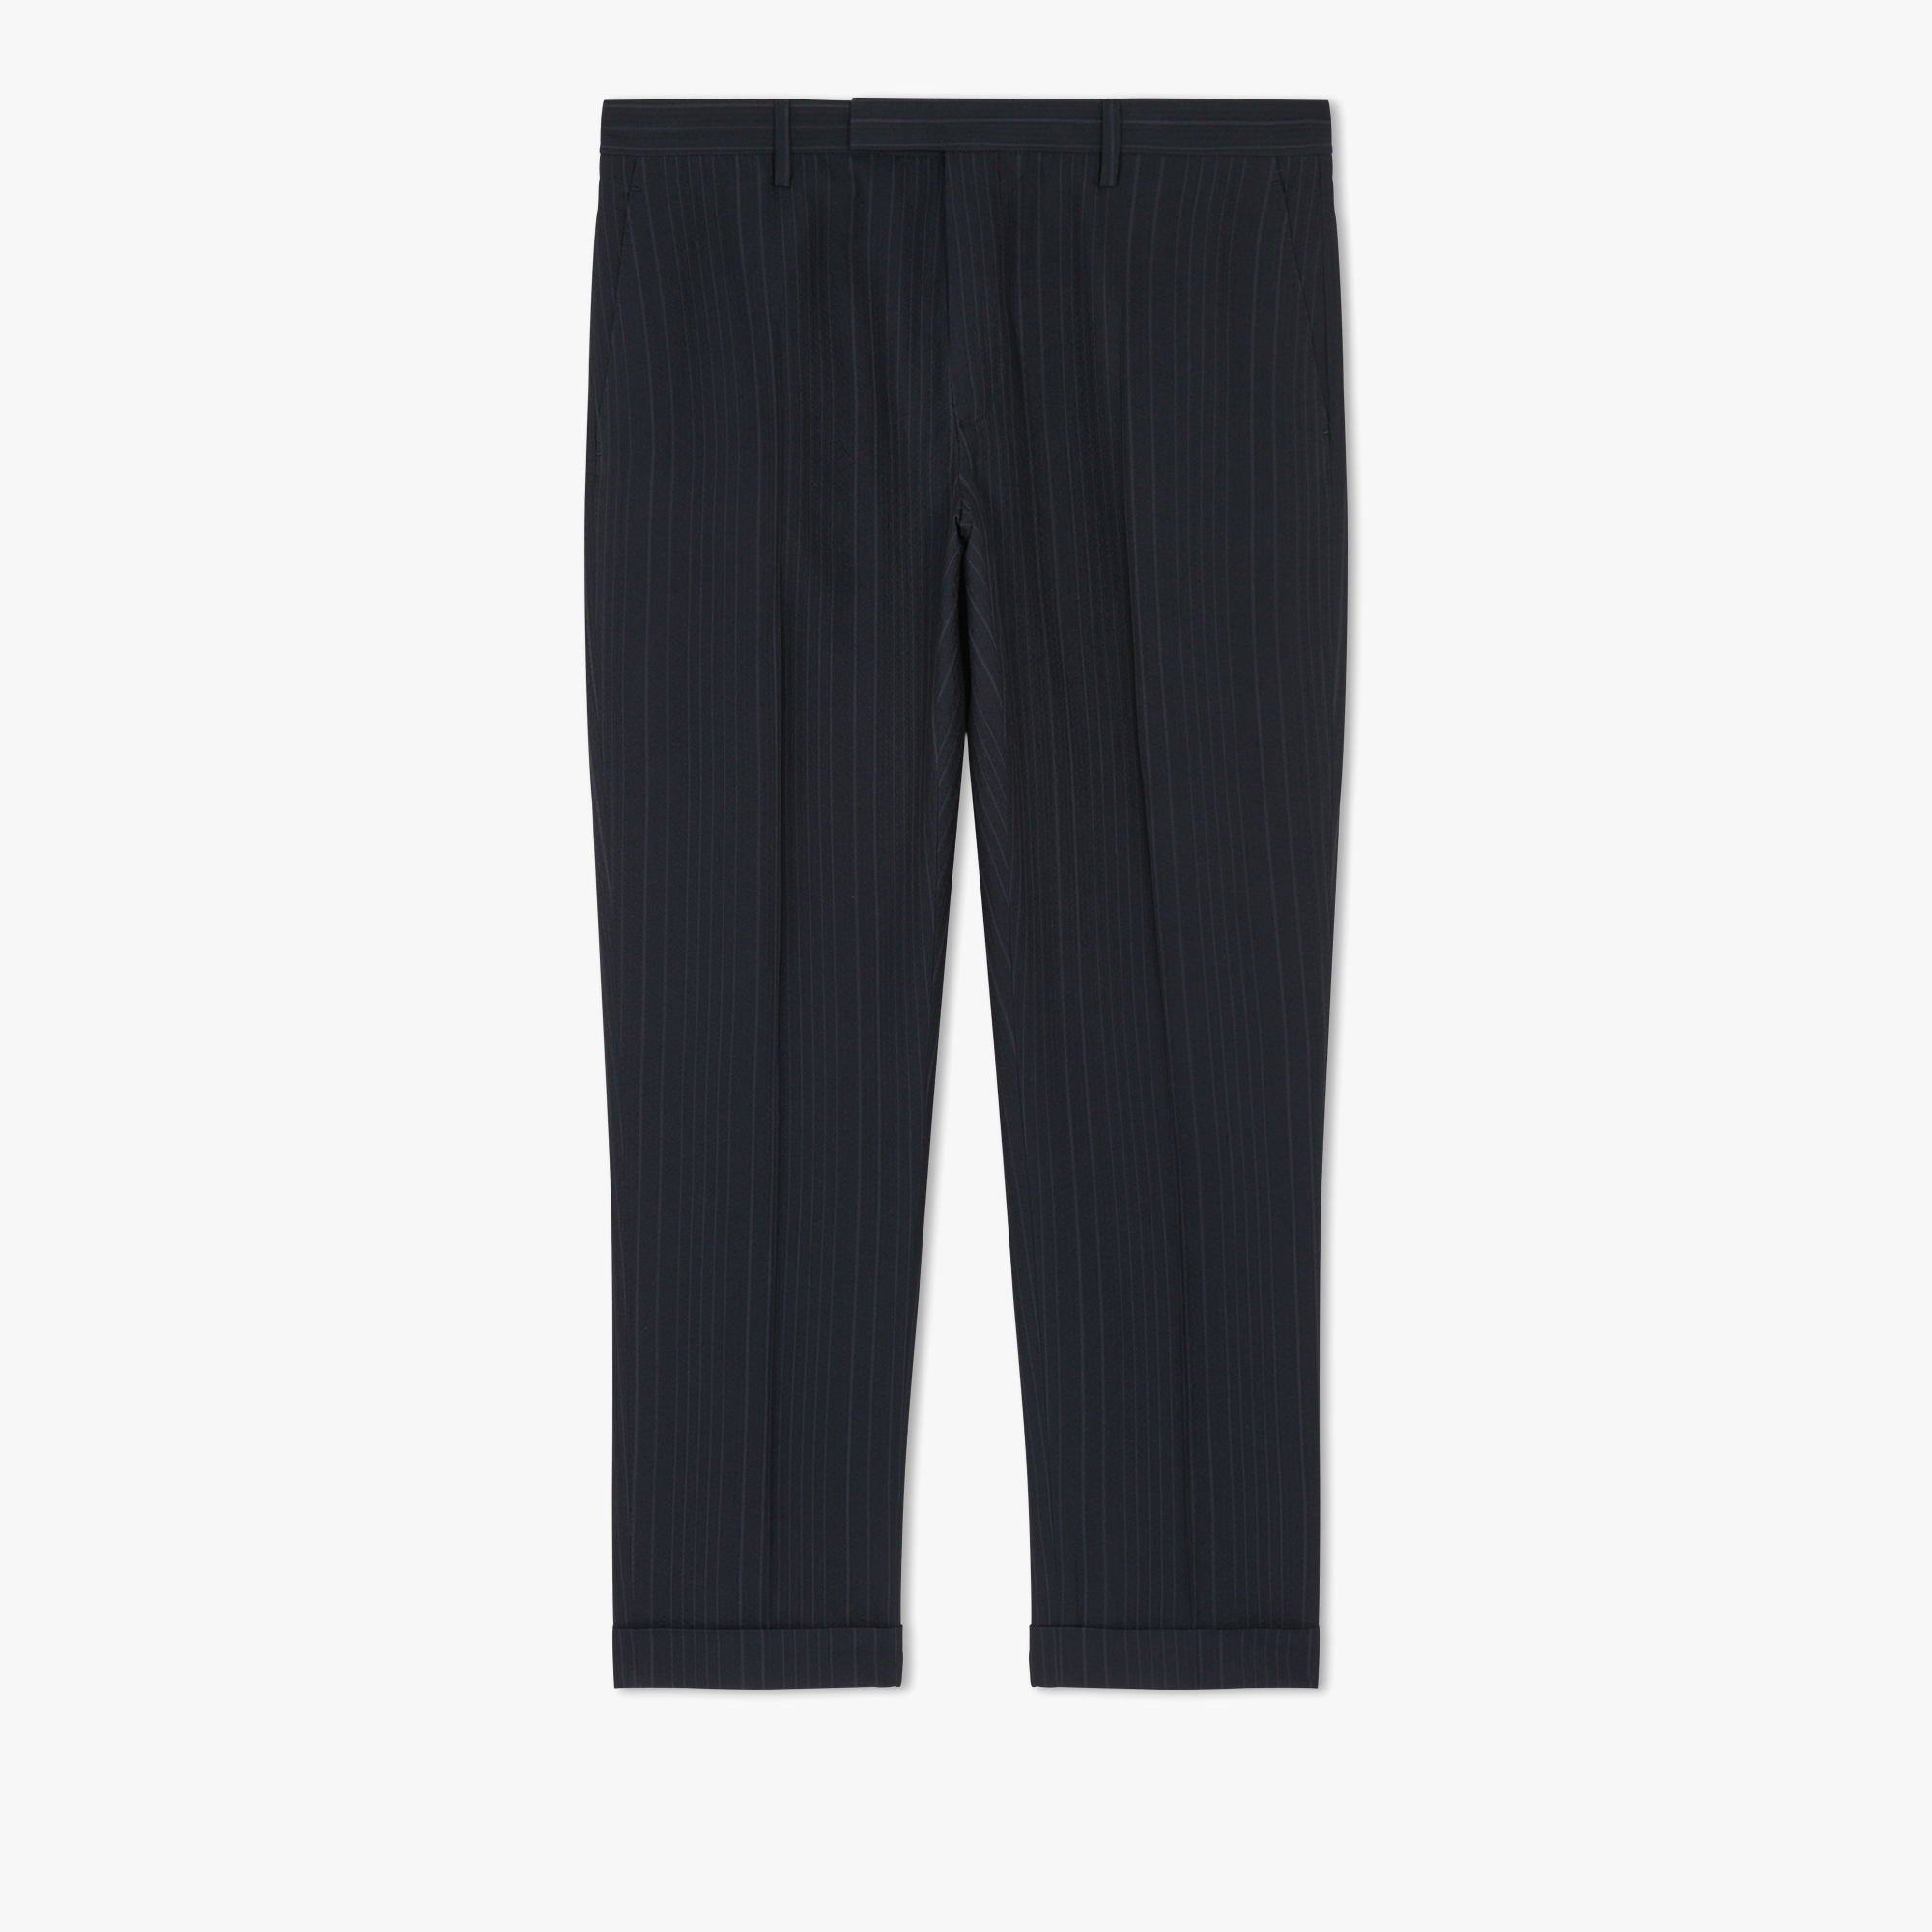 Cotton & Silk Light Construction Trousers, COLD NIGHT BLUE, hi-res